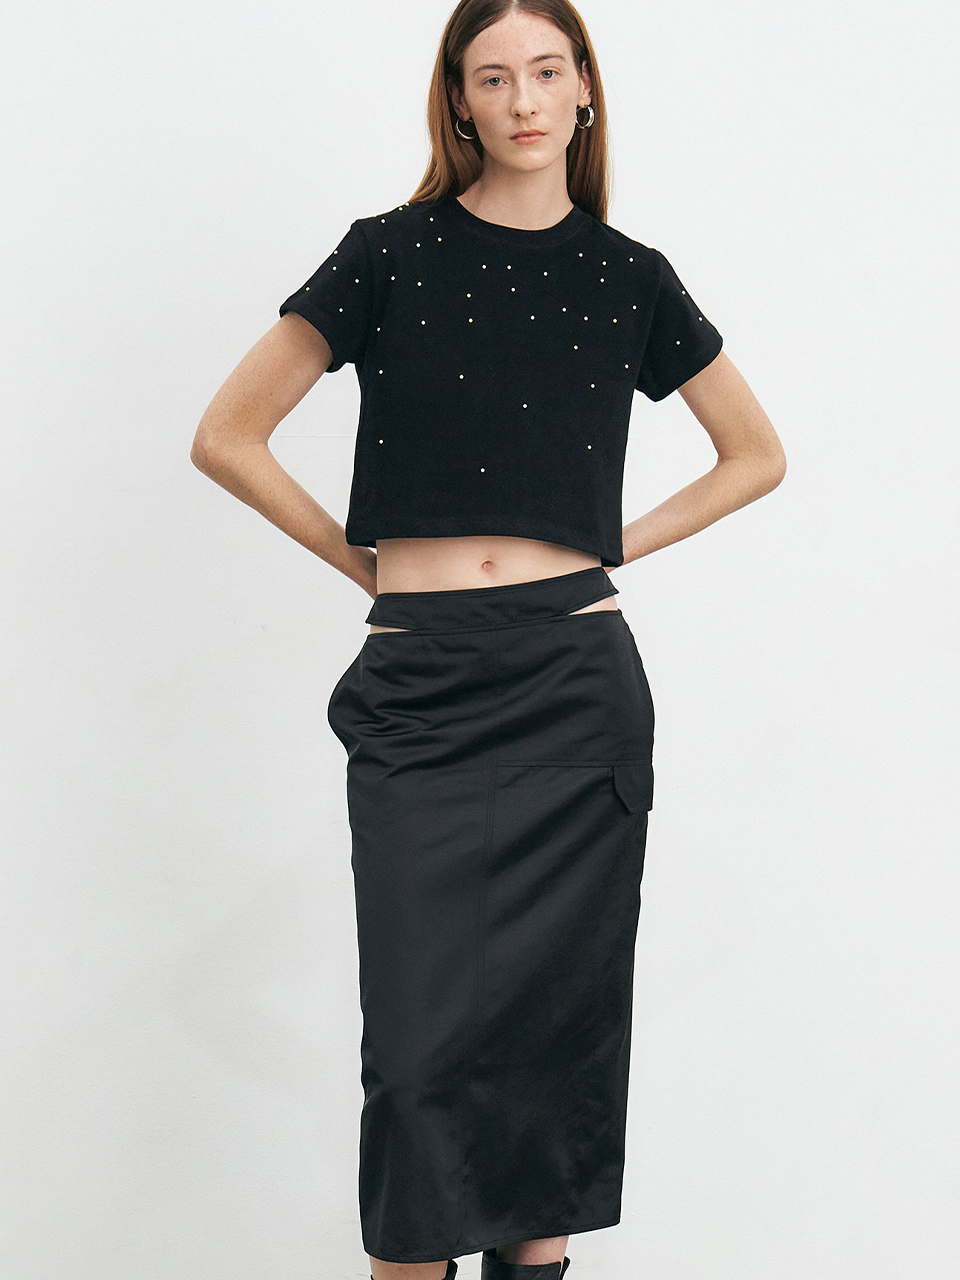 HACIE - GLOSSY SATIN CUT-OUT SKIRT [3COLORS]